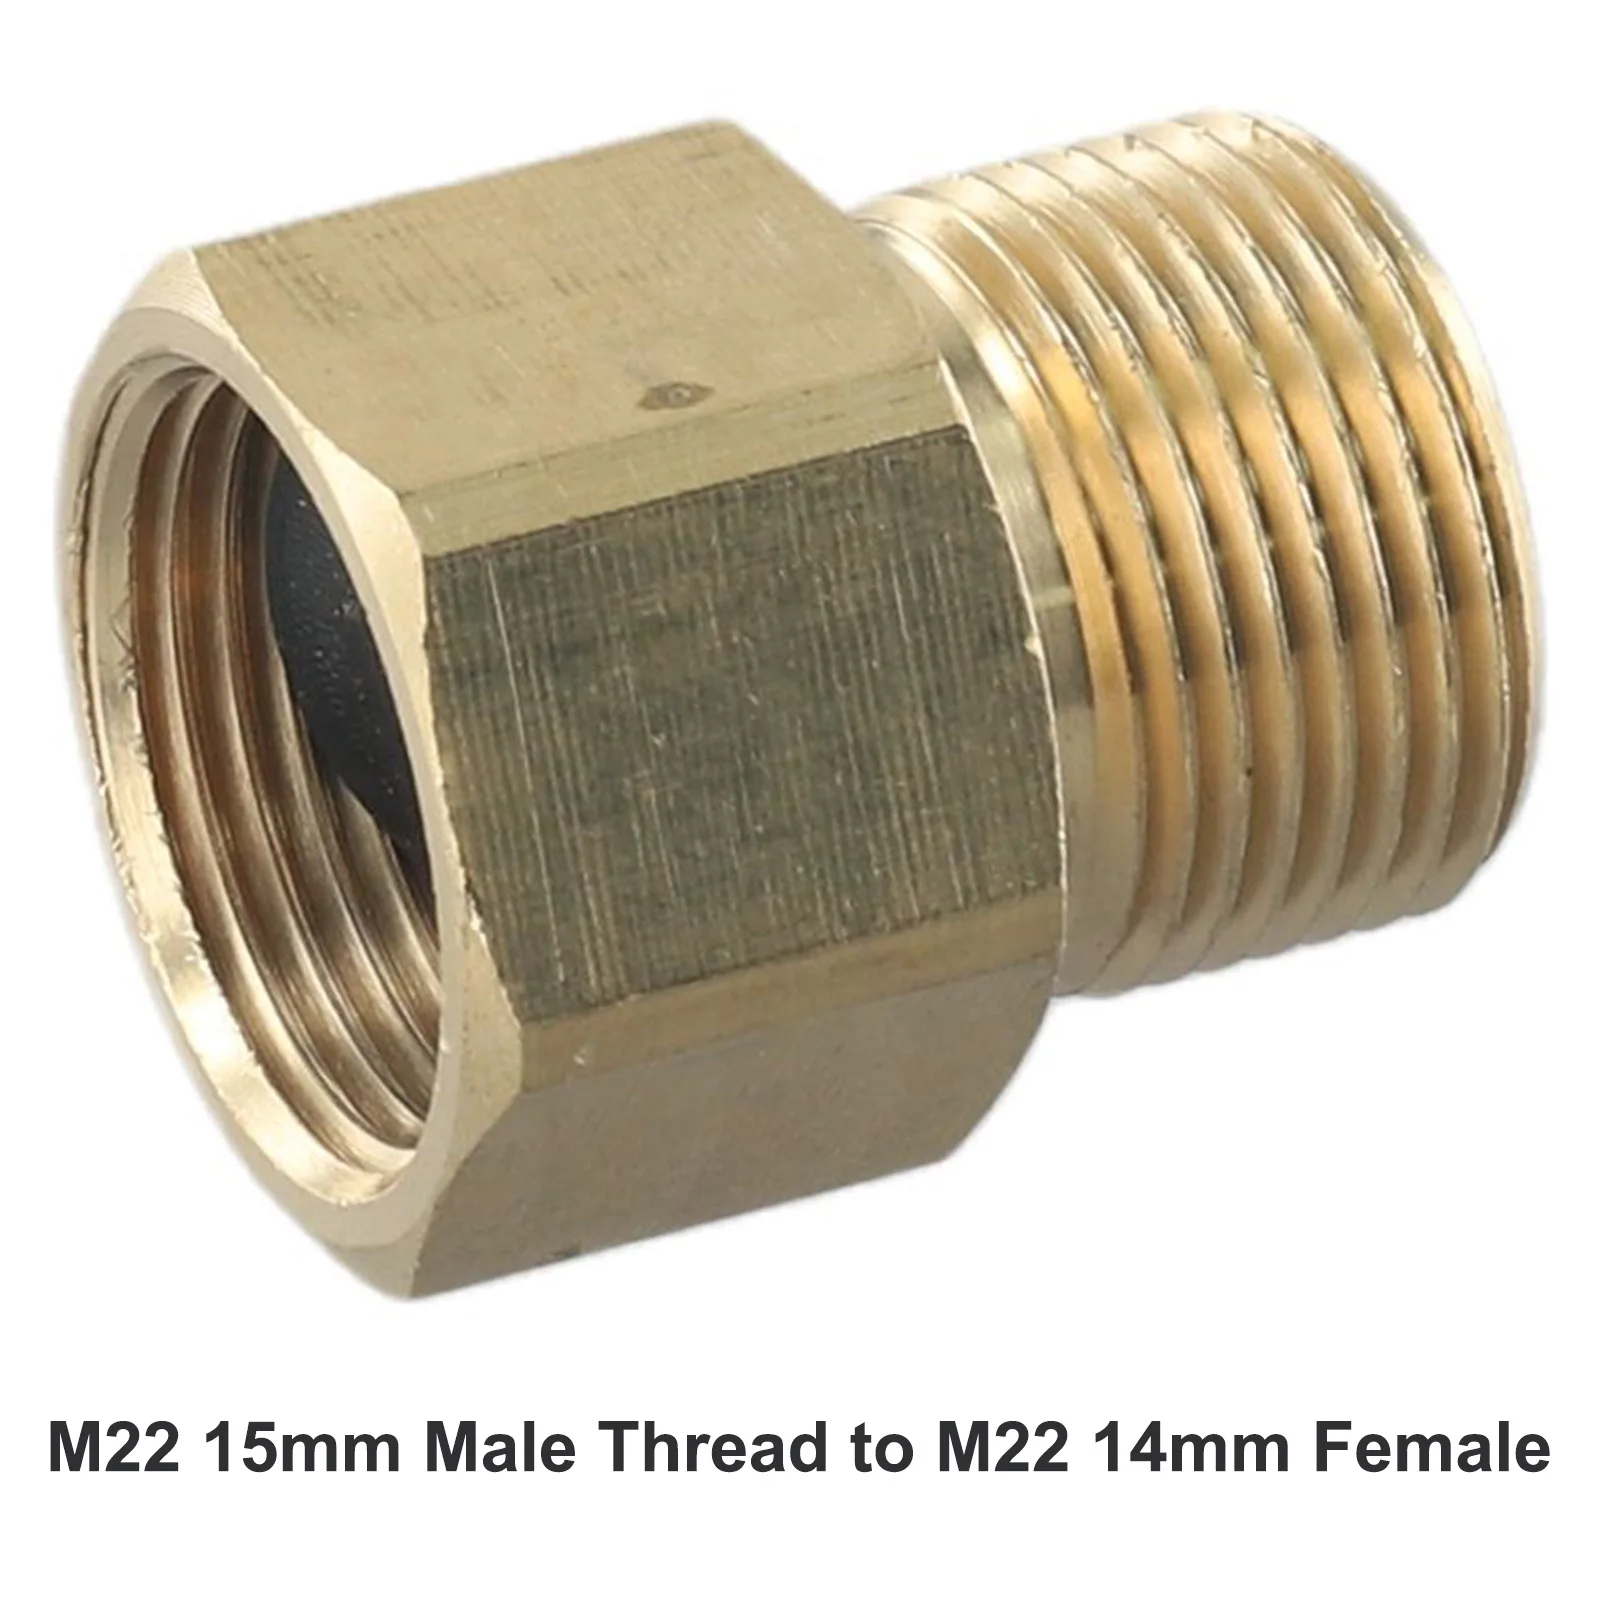 

Pressure Washer Adapter Metric Adapter Parts Universal 1 Pc 4500 PSI Accessories Brass Fittings M22 14mm Female